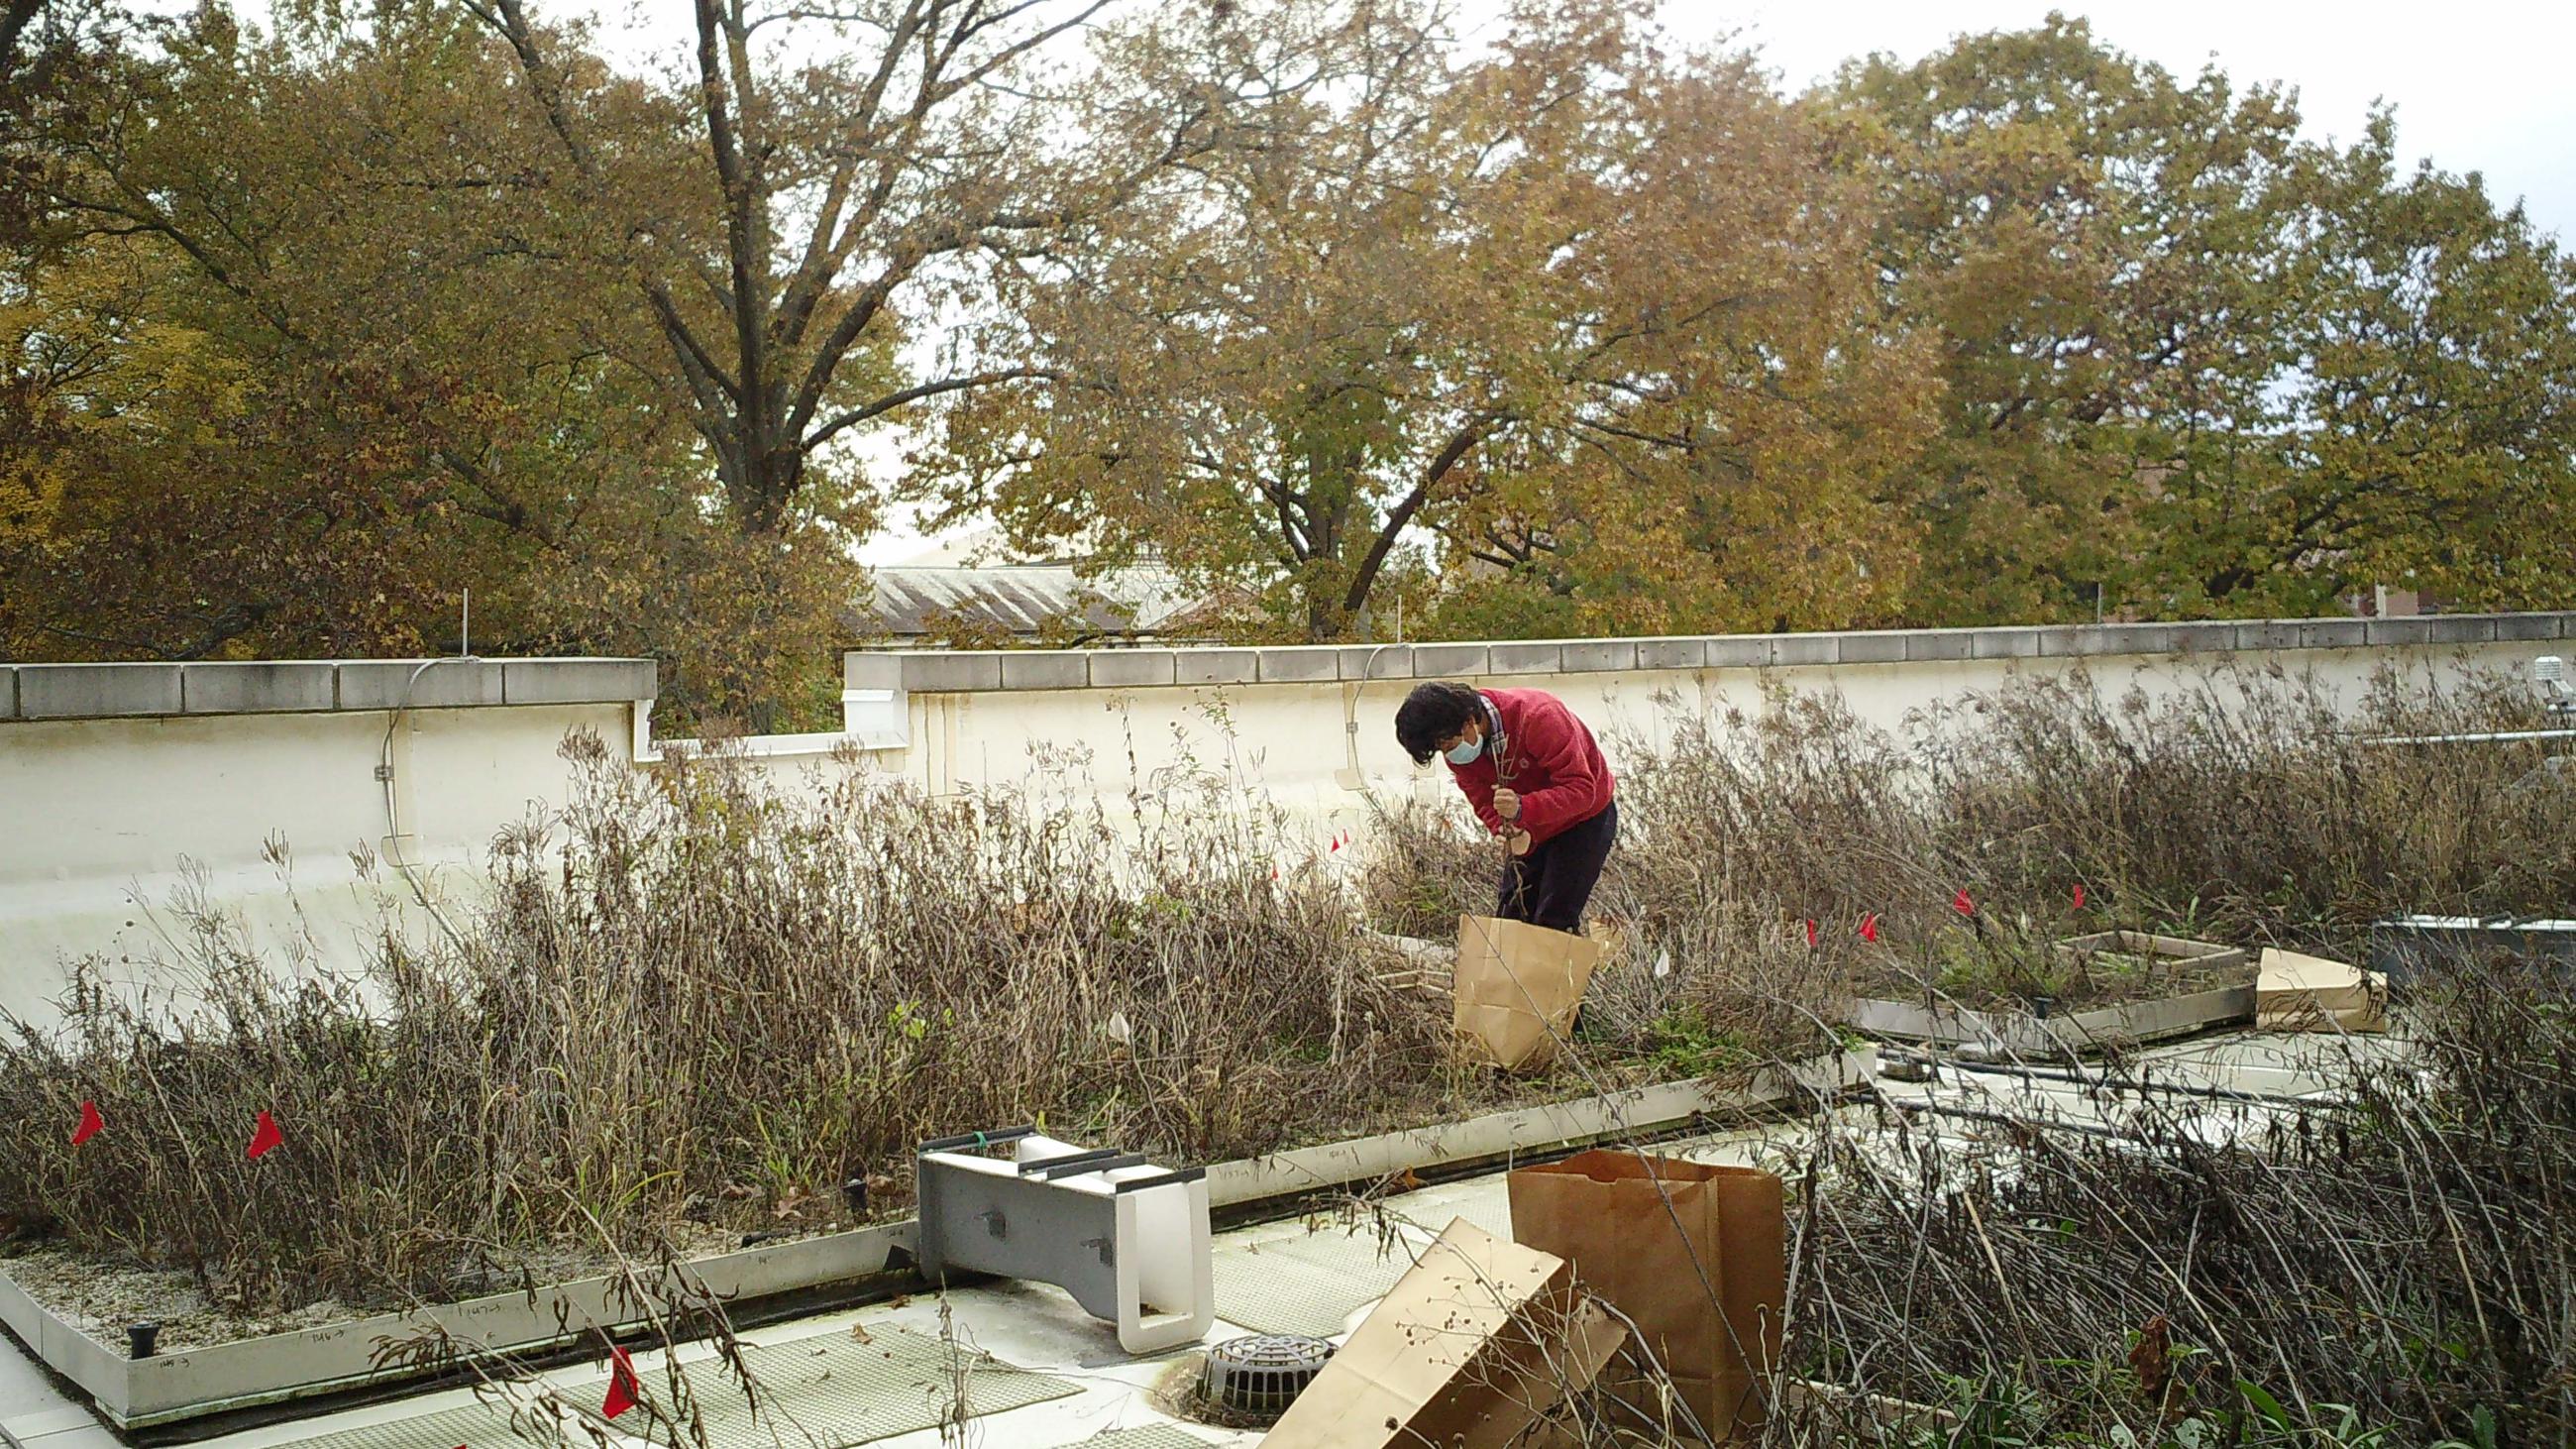 A researched crouches in one of the planted beds on the Schoonover green roof.